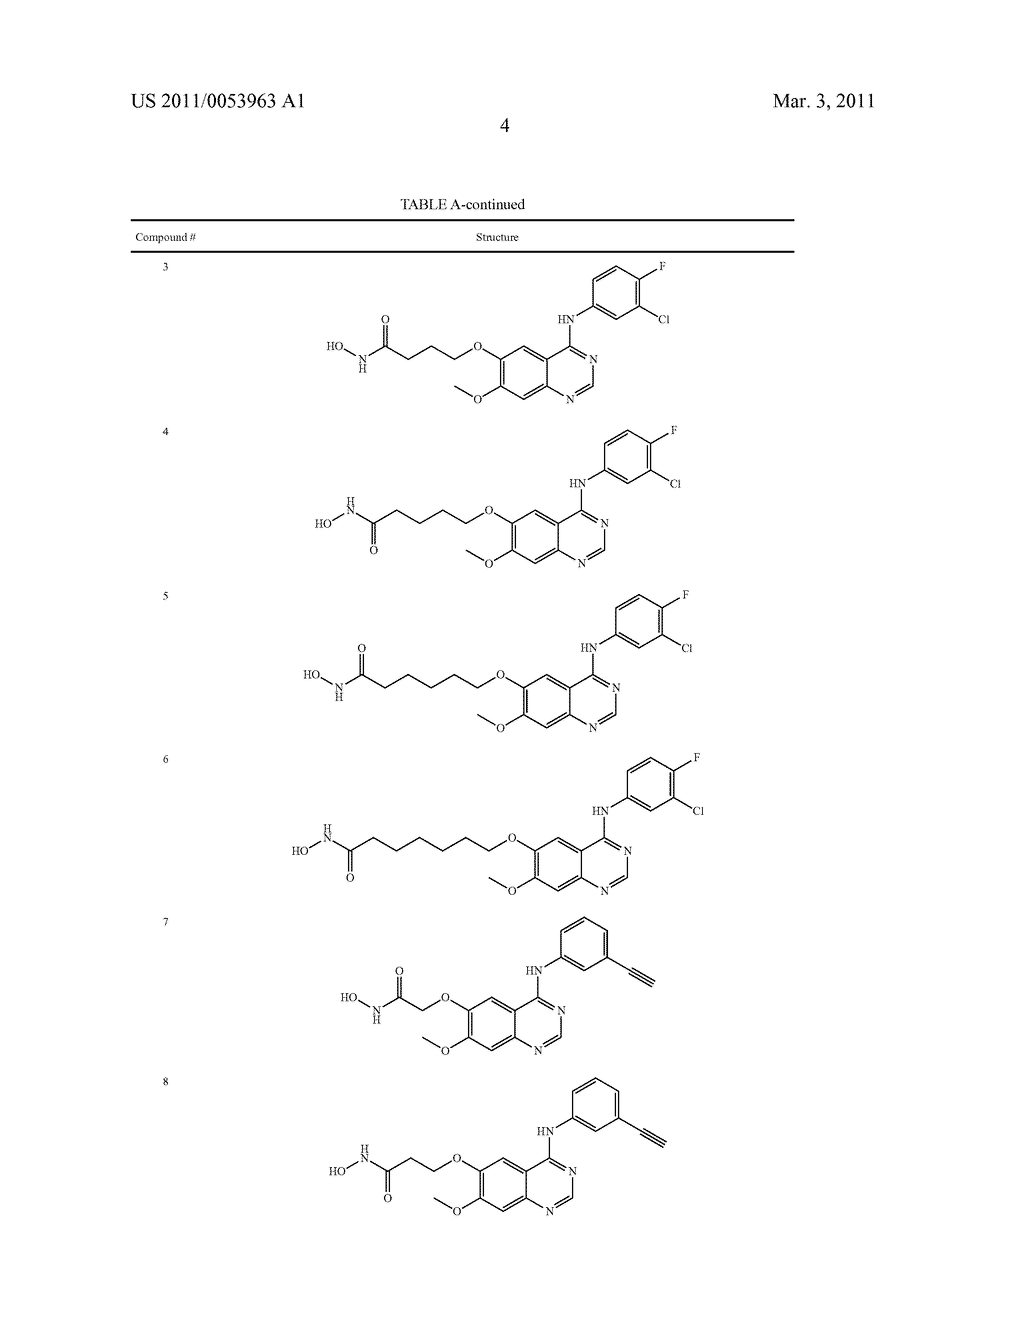 TARTRATE SALTS OF QUINAZOLINE BASED EGFR INHIBITORS CONTAINING A ZINC BINDING MOIETY - diagram, schematic, and image 25